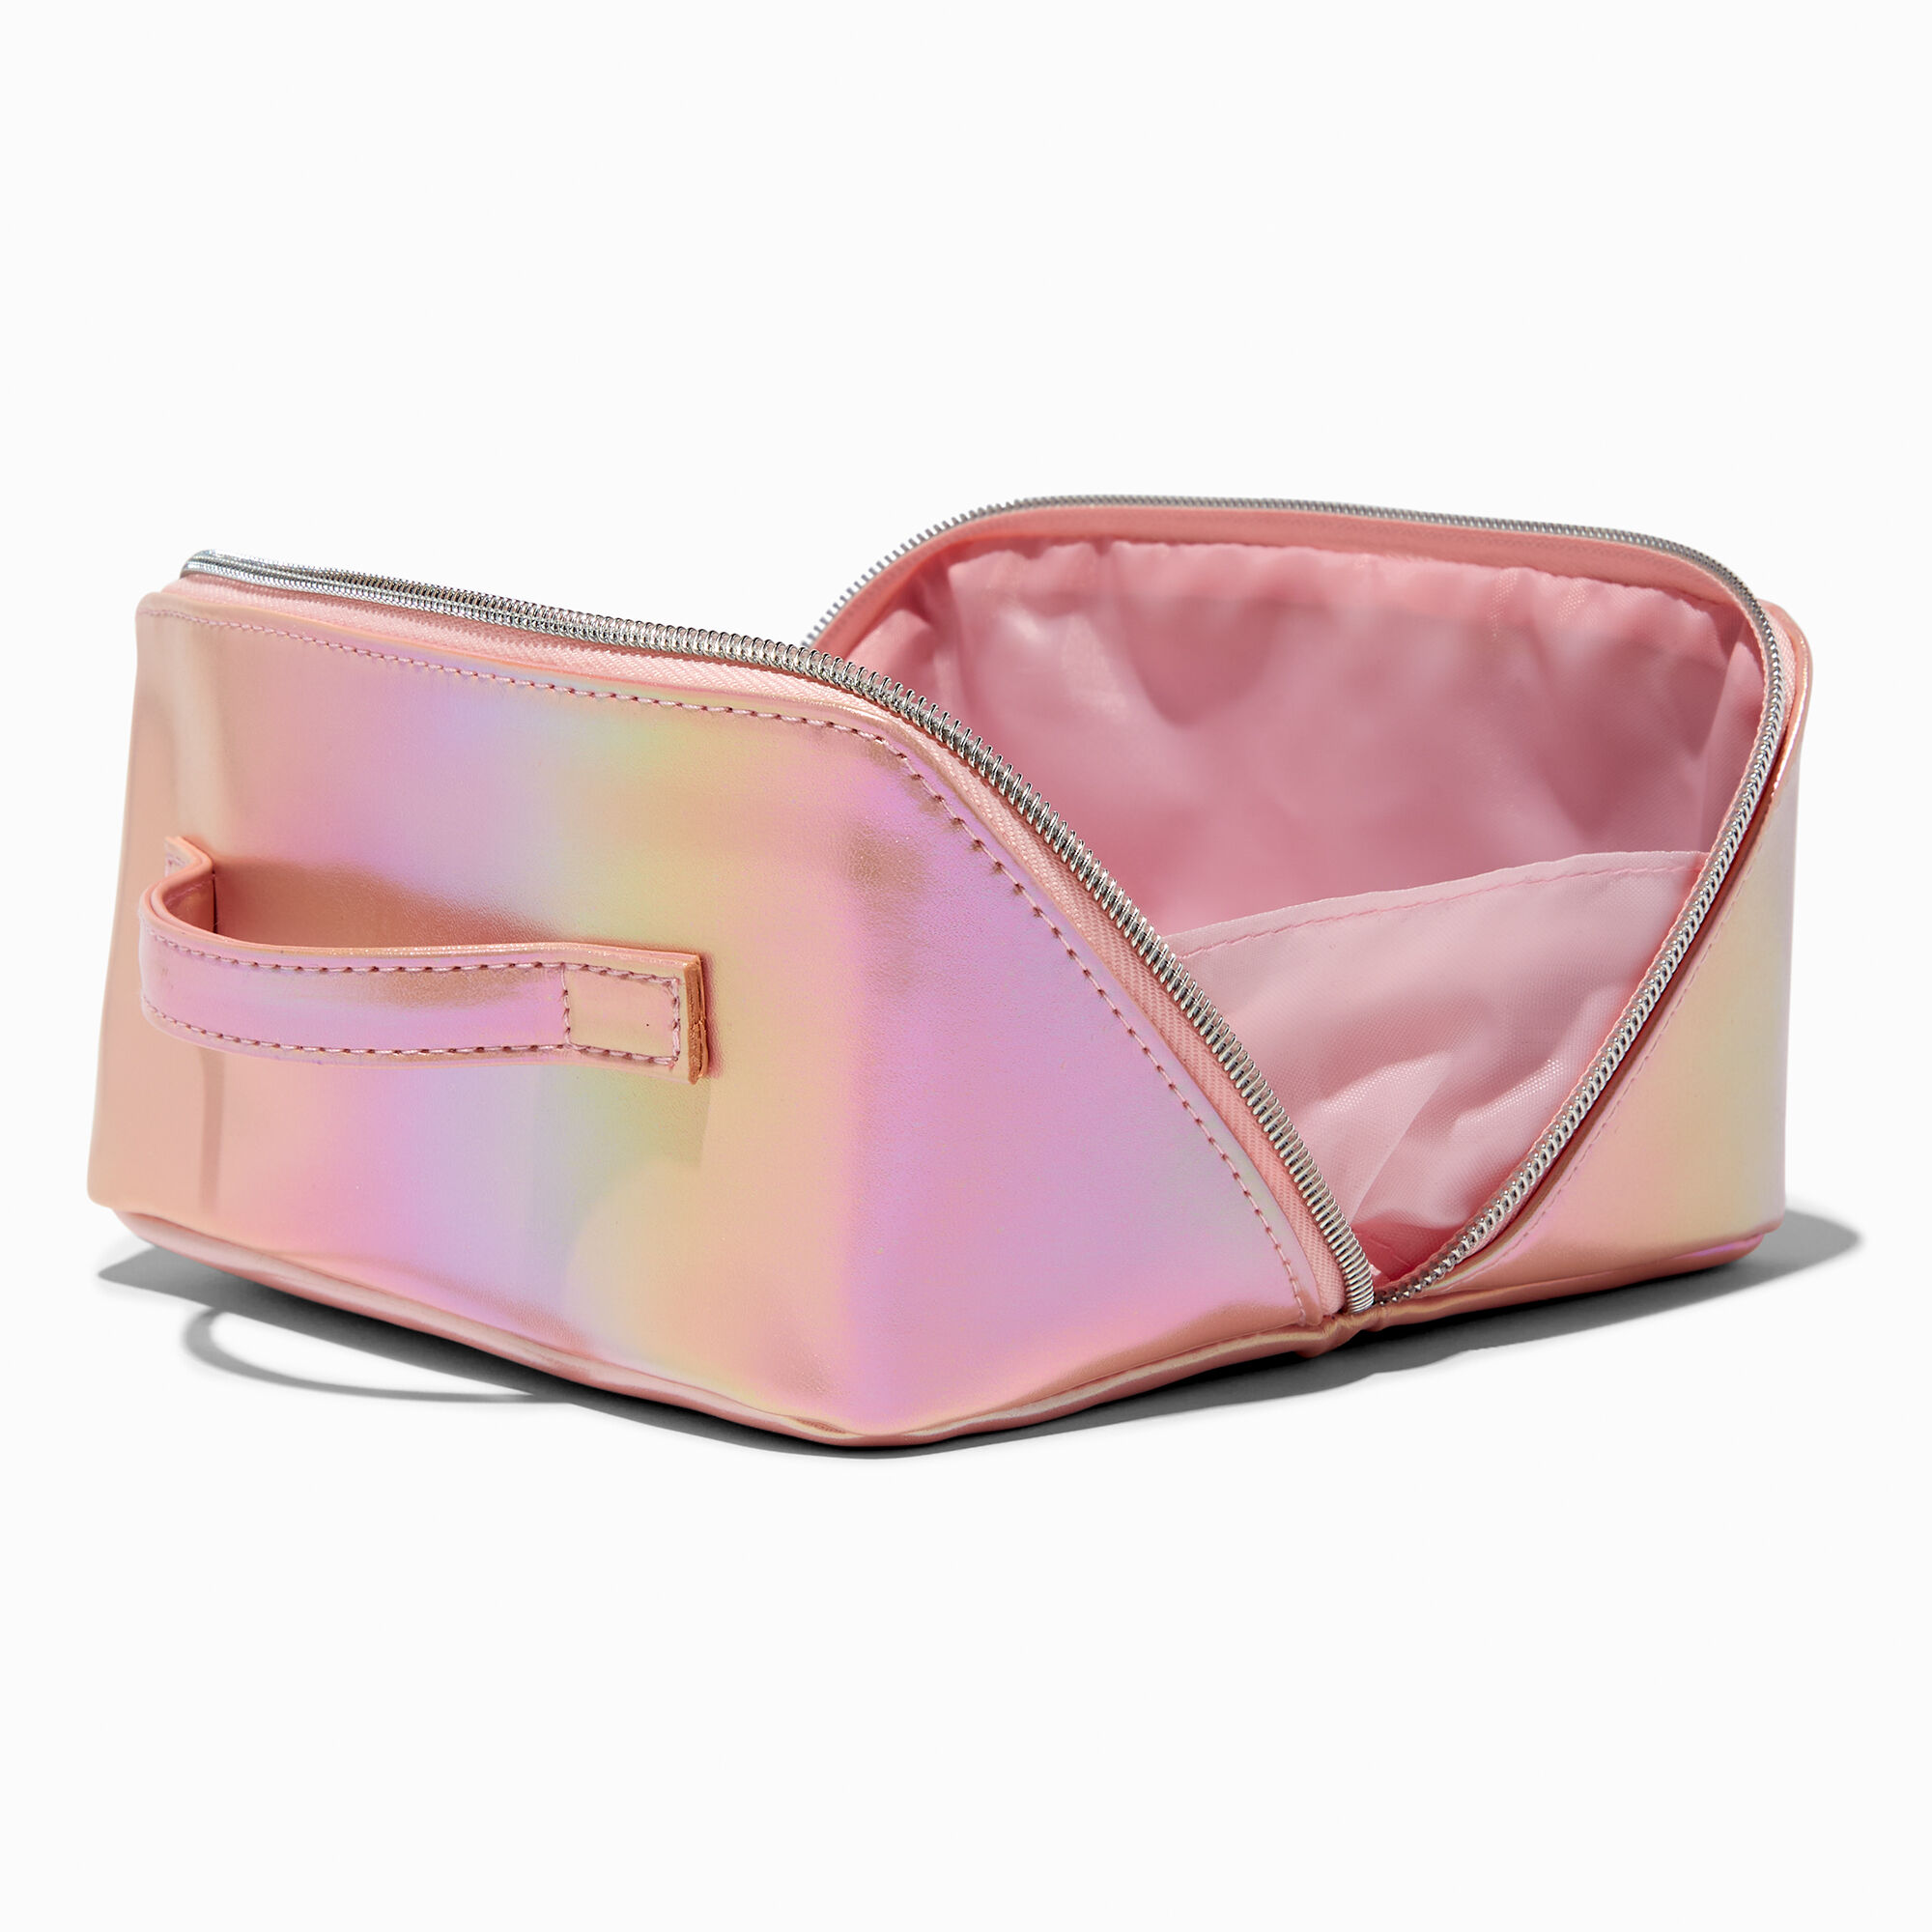 View Claires Flat Ab Makeup Bag Pink information